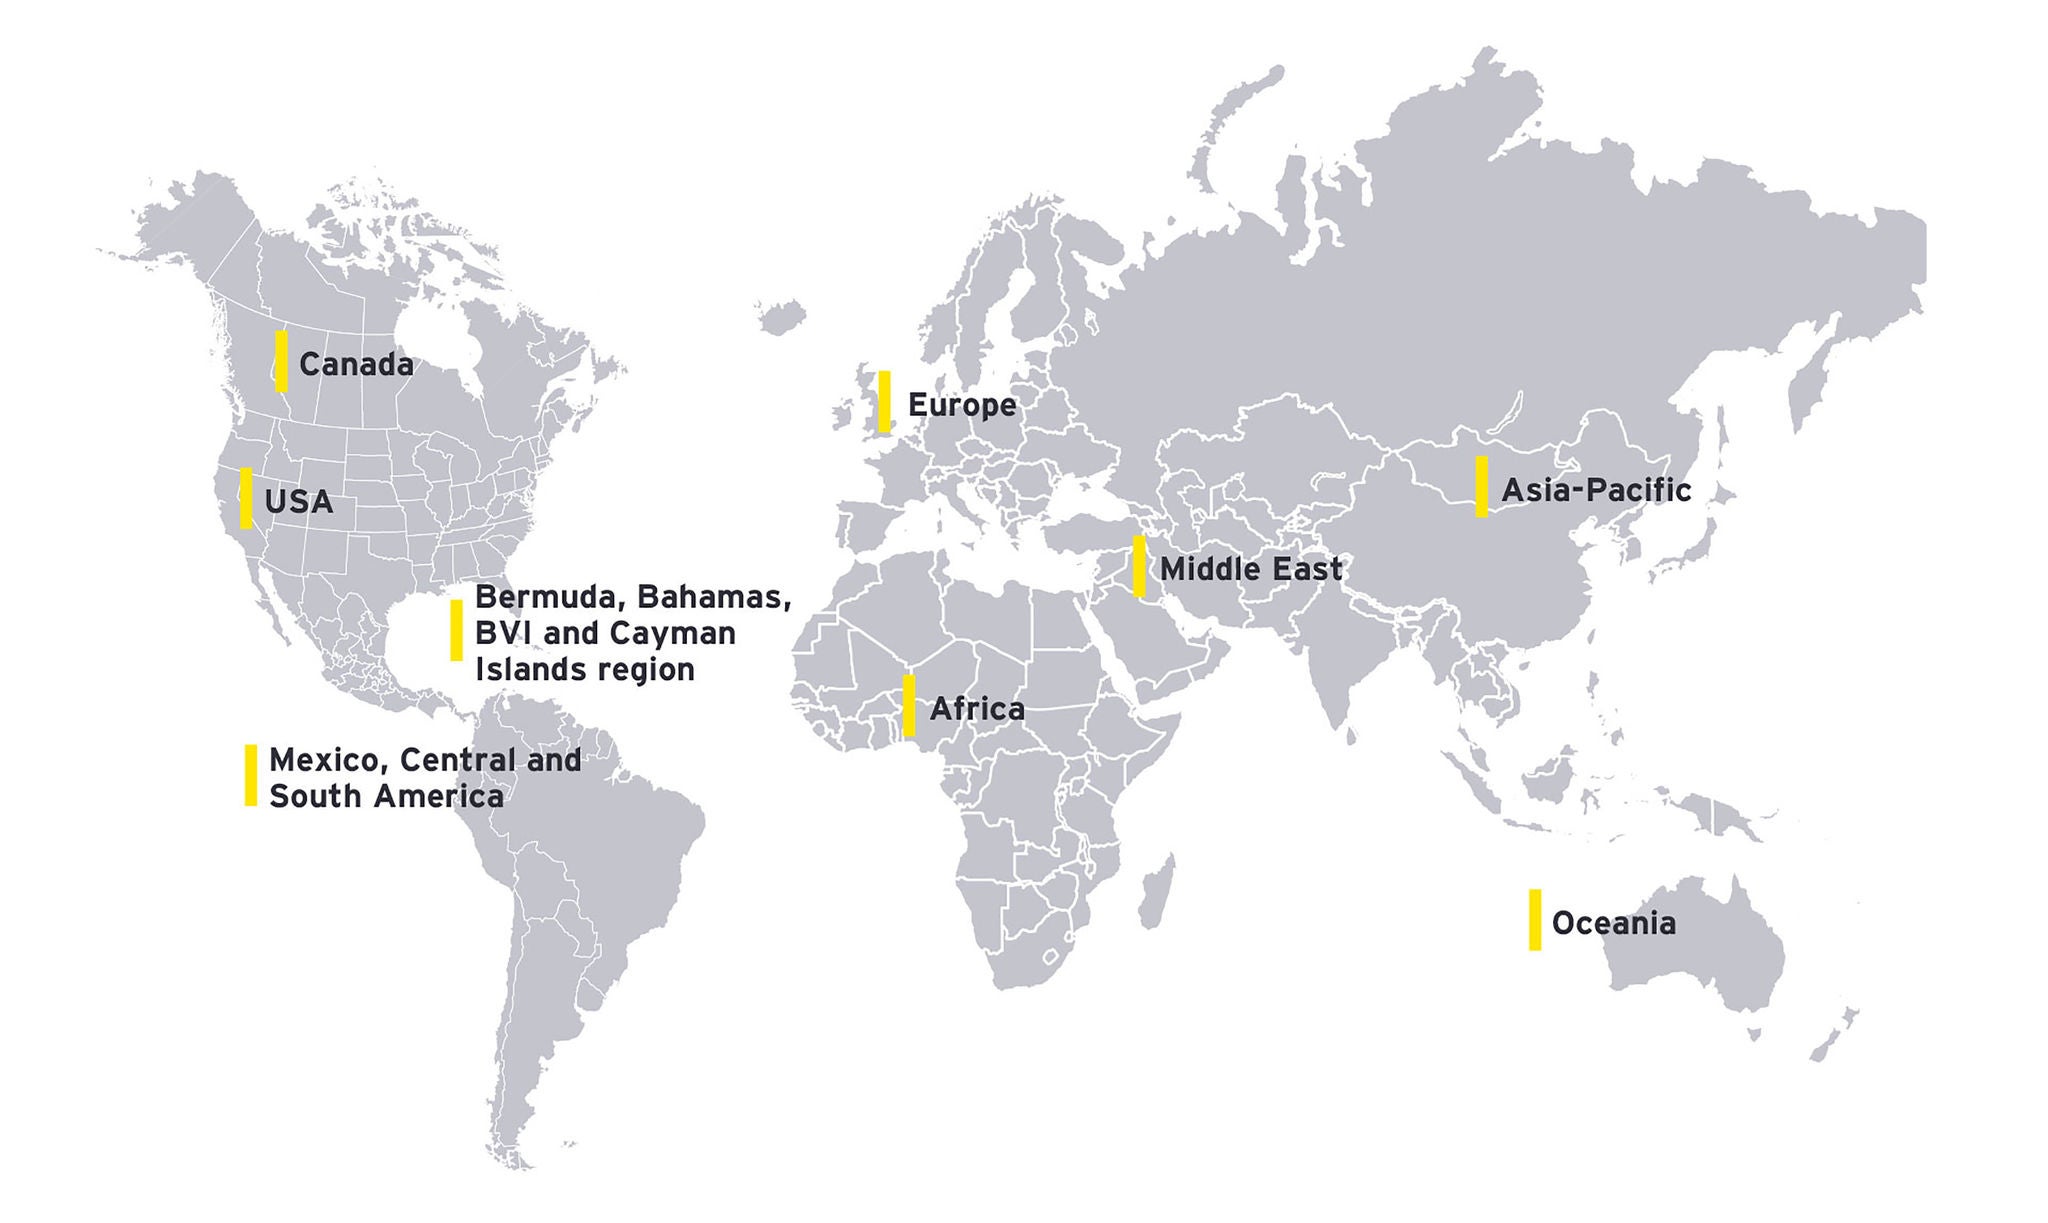 The EY global VME network